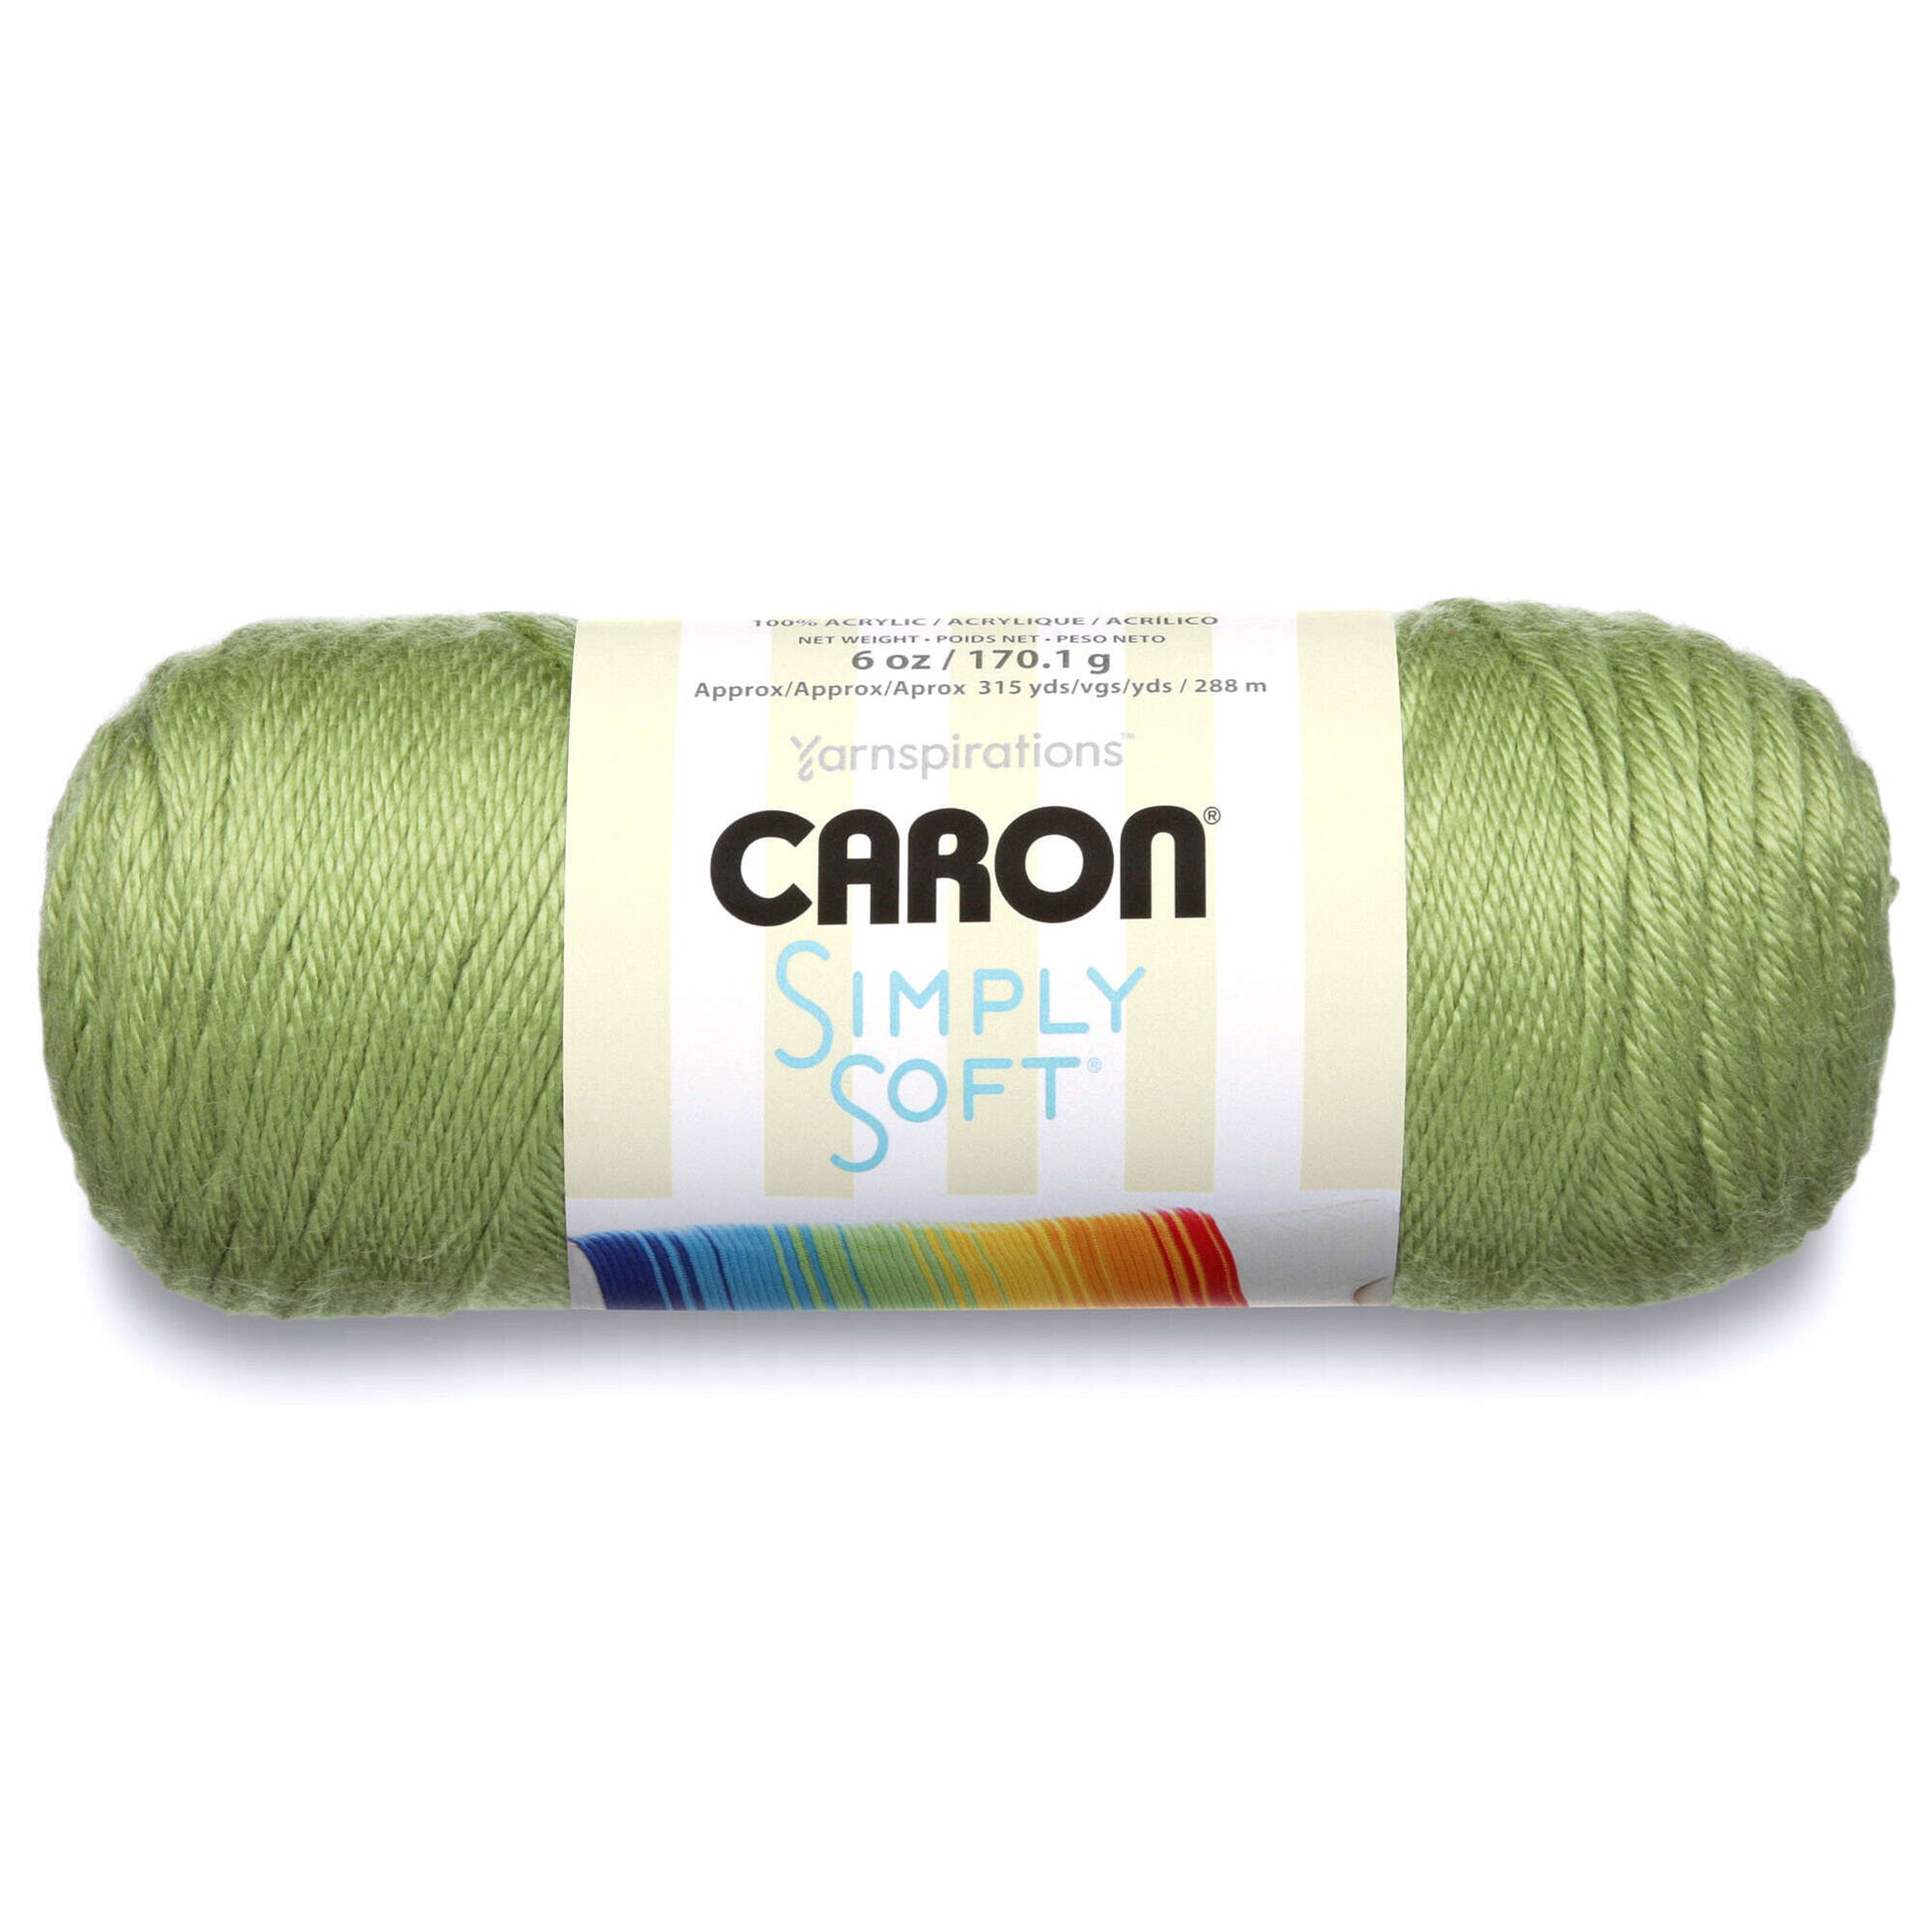 100% Pure Cotton Crochet Yarn by Threadart | OFF-WHITE | 50 gram Skeins |  Worsted Medium #4 Yarn | 85 yds per Skein - 30 Colors Available